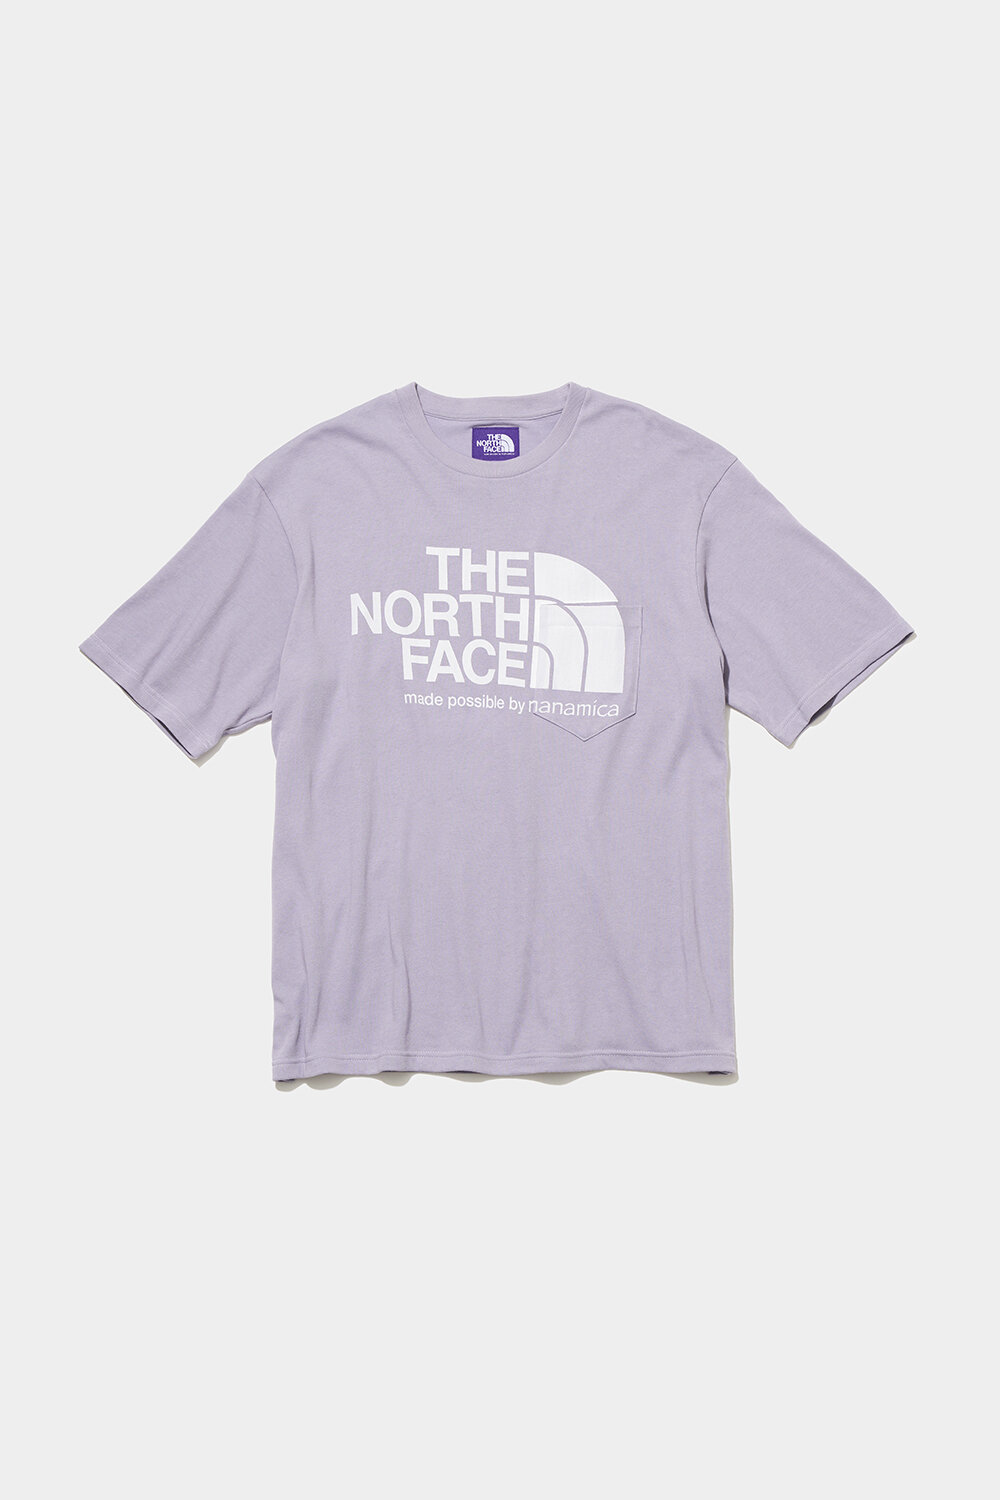 The North Face Purple Label x Palace Skateboards Spring/Summer '21 